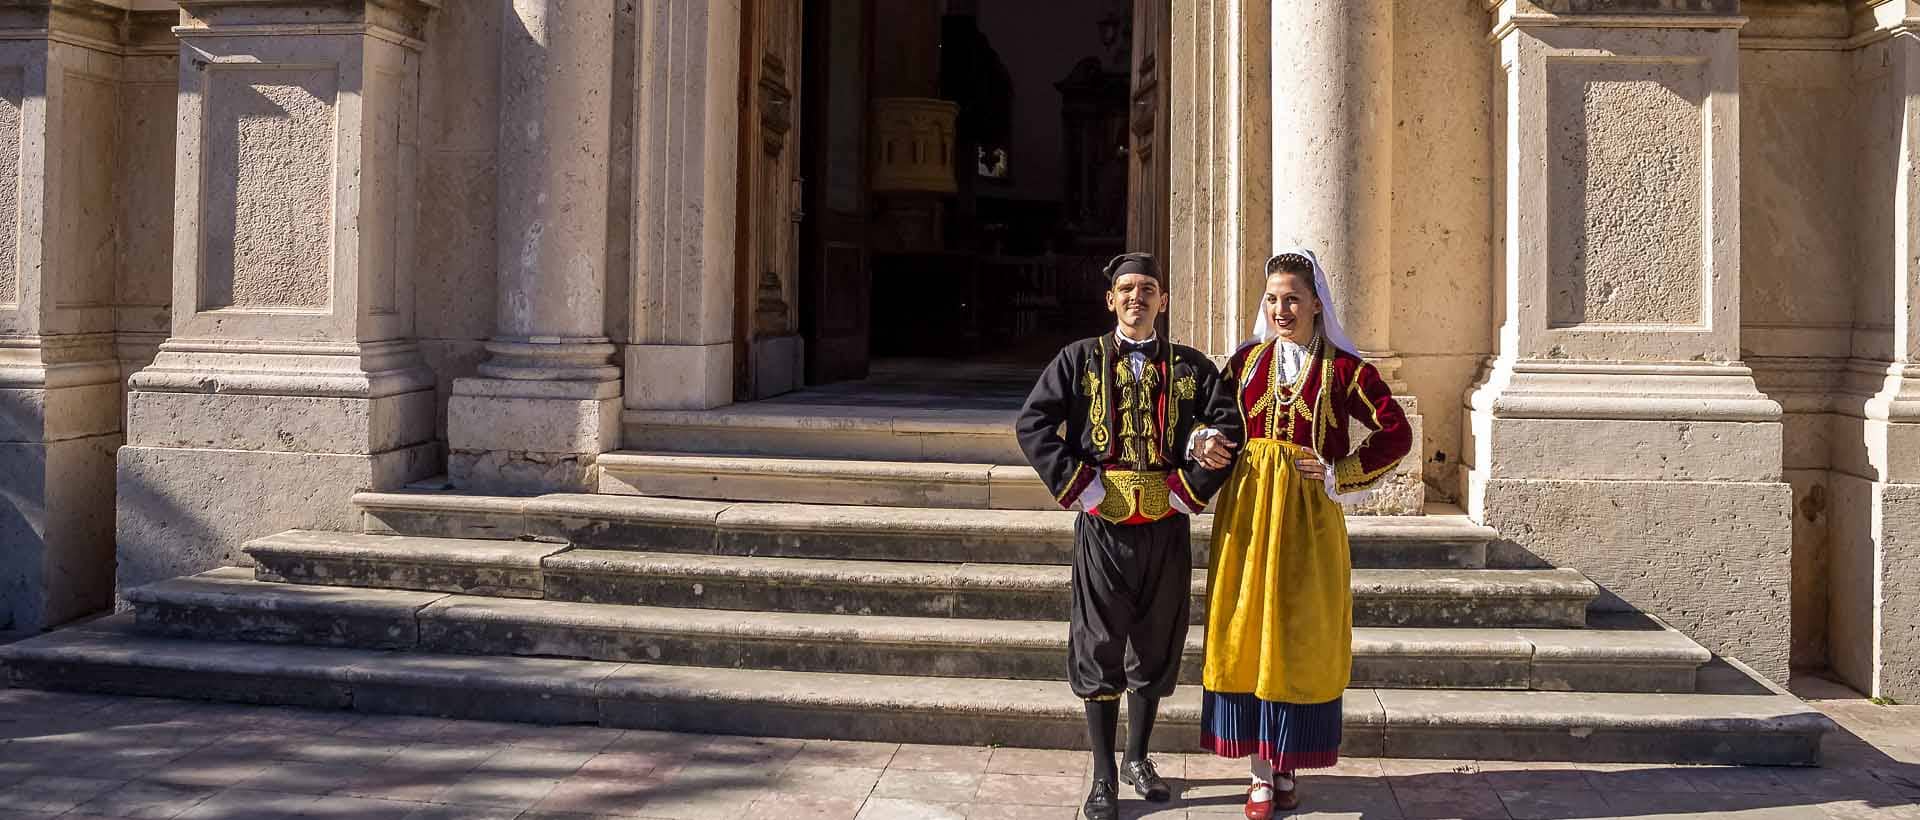 A local man and woman standing in front of Prčanj Temple during a private tour, dressed in traditional Boka bay clothes. The entrance to Prčanj Temple is also visible.